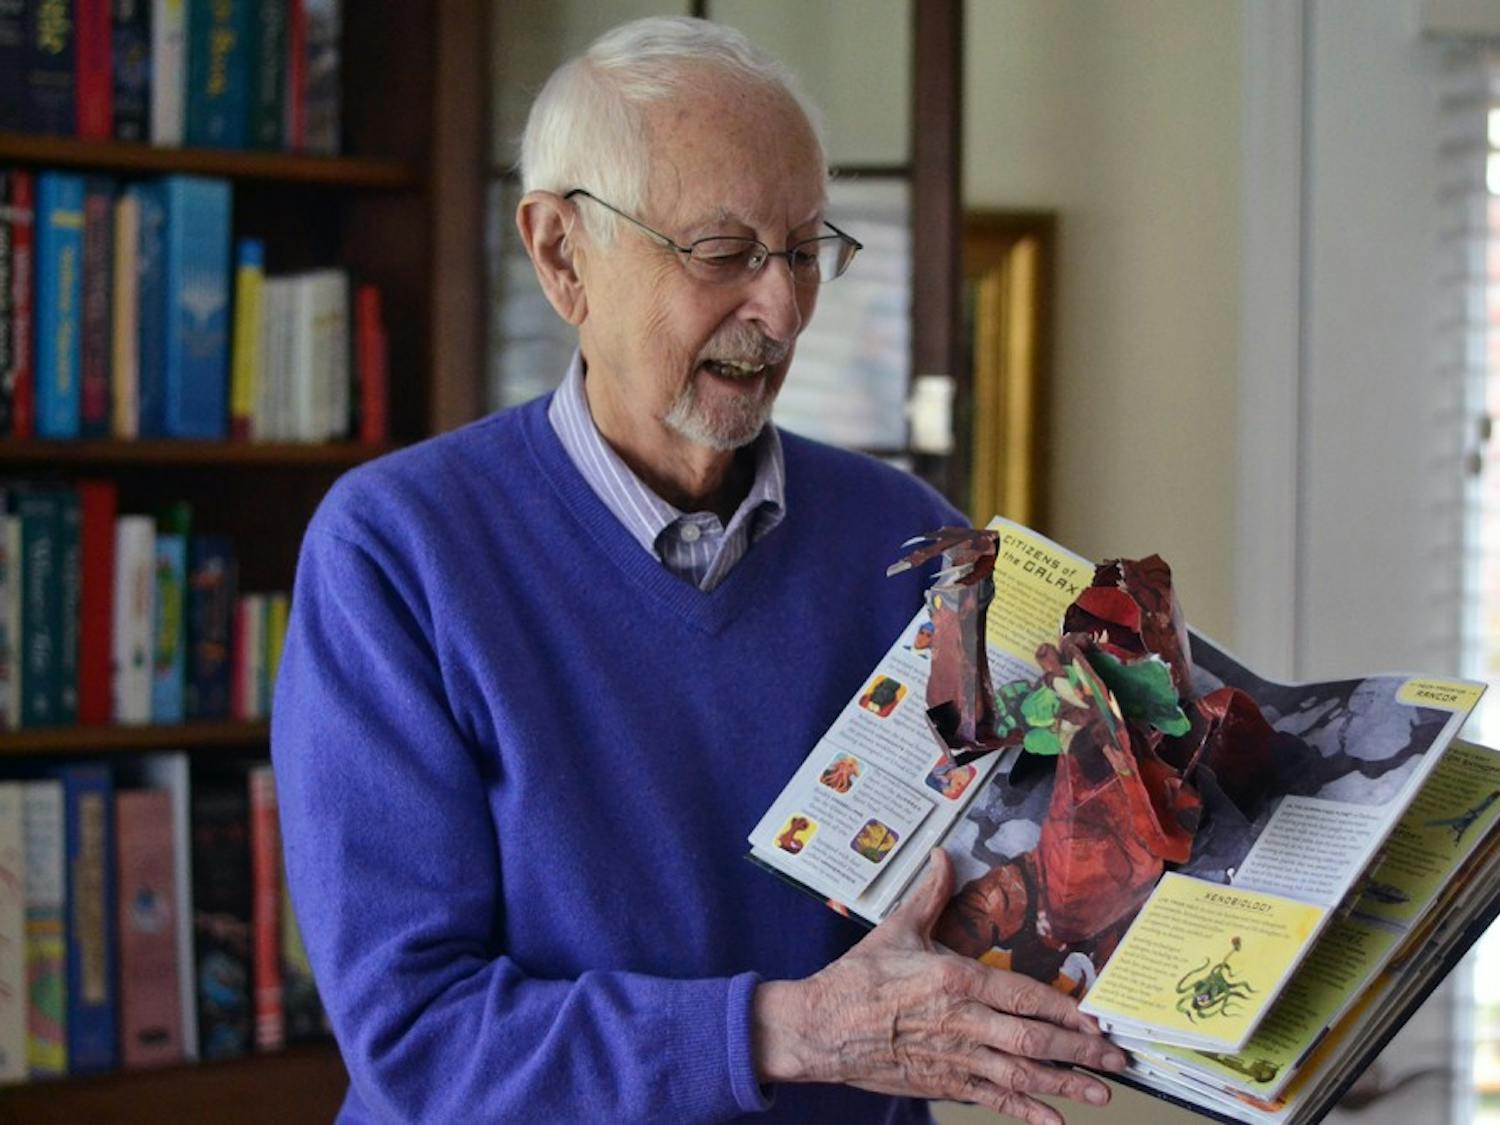 Retired UNC professor Sterling Hennis displays his collection of pop-up books on Tuesday, Nov. 3. He recently donated 1600 of his books to Wilson Library on campus.